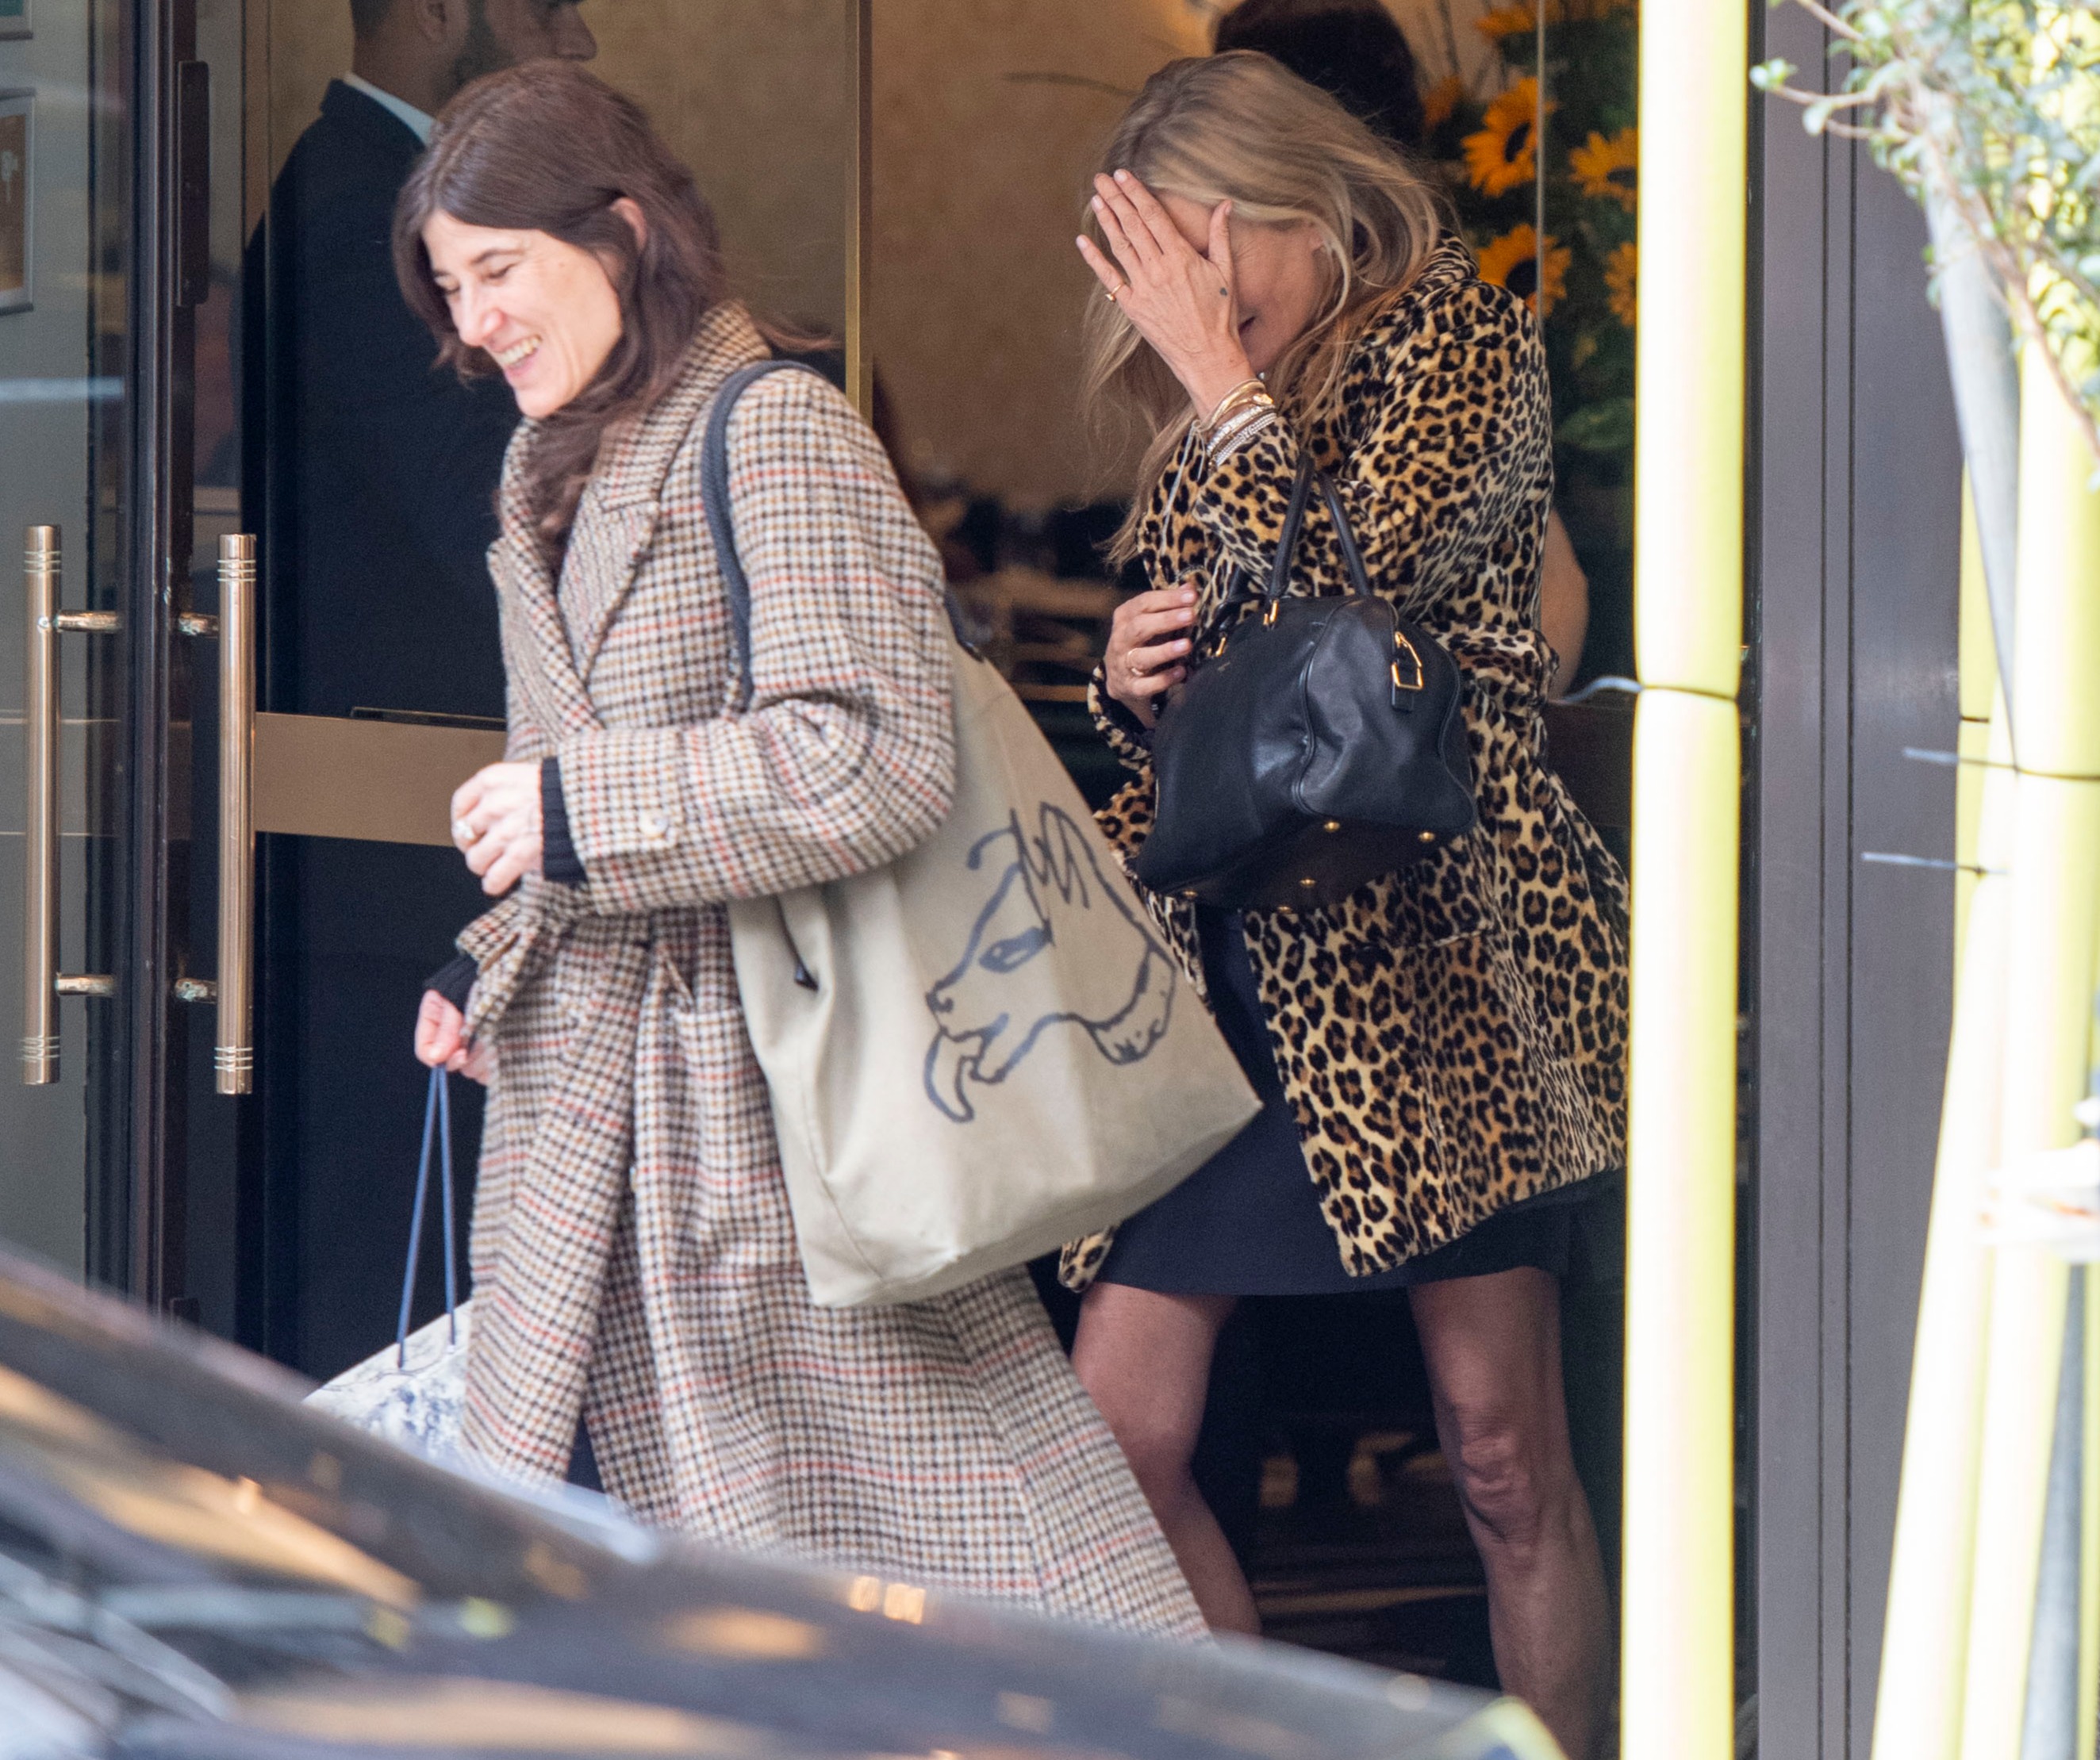 Kate tried to hide her face as she left the Mayfair restaurant